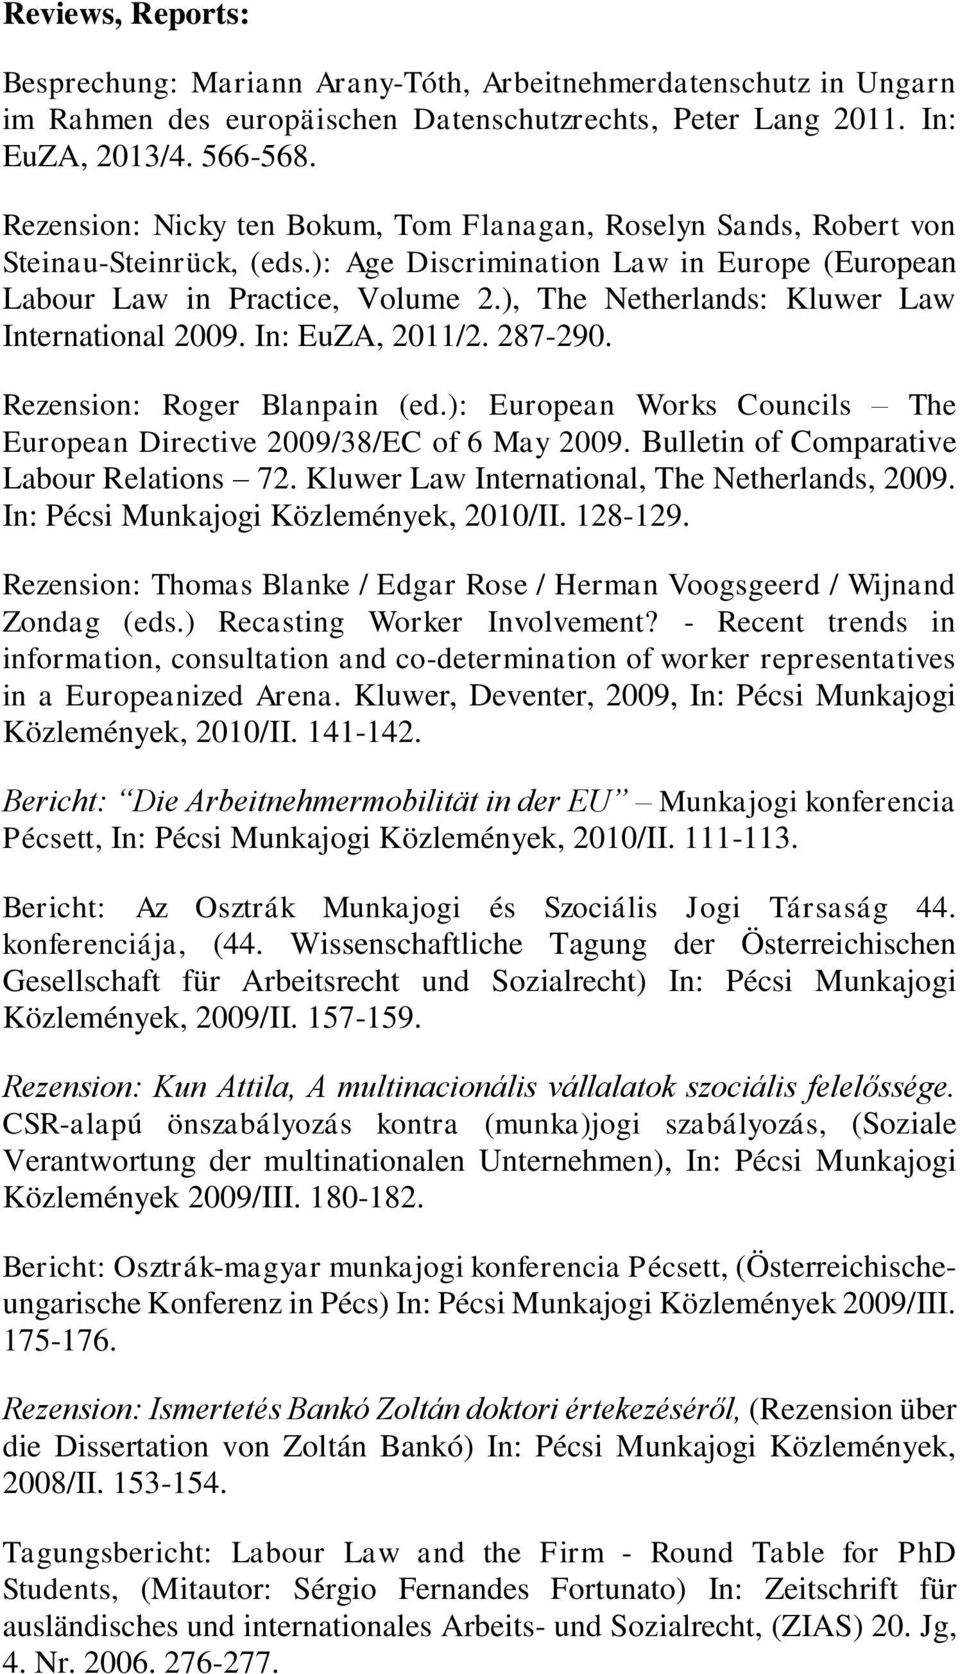 ), The Netherlands: Kluwer Law International 2009. In: EuZA, 2011/2. 287-290. Rezension: Roger Blanpain (ed.): European Works Councils The European Directive 2009/38/EC of 6 May 2009.